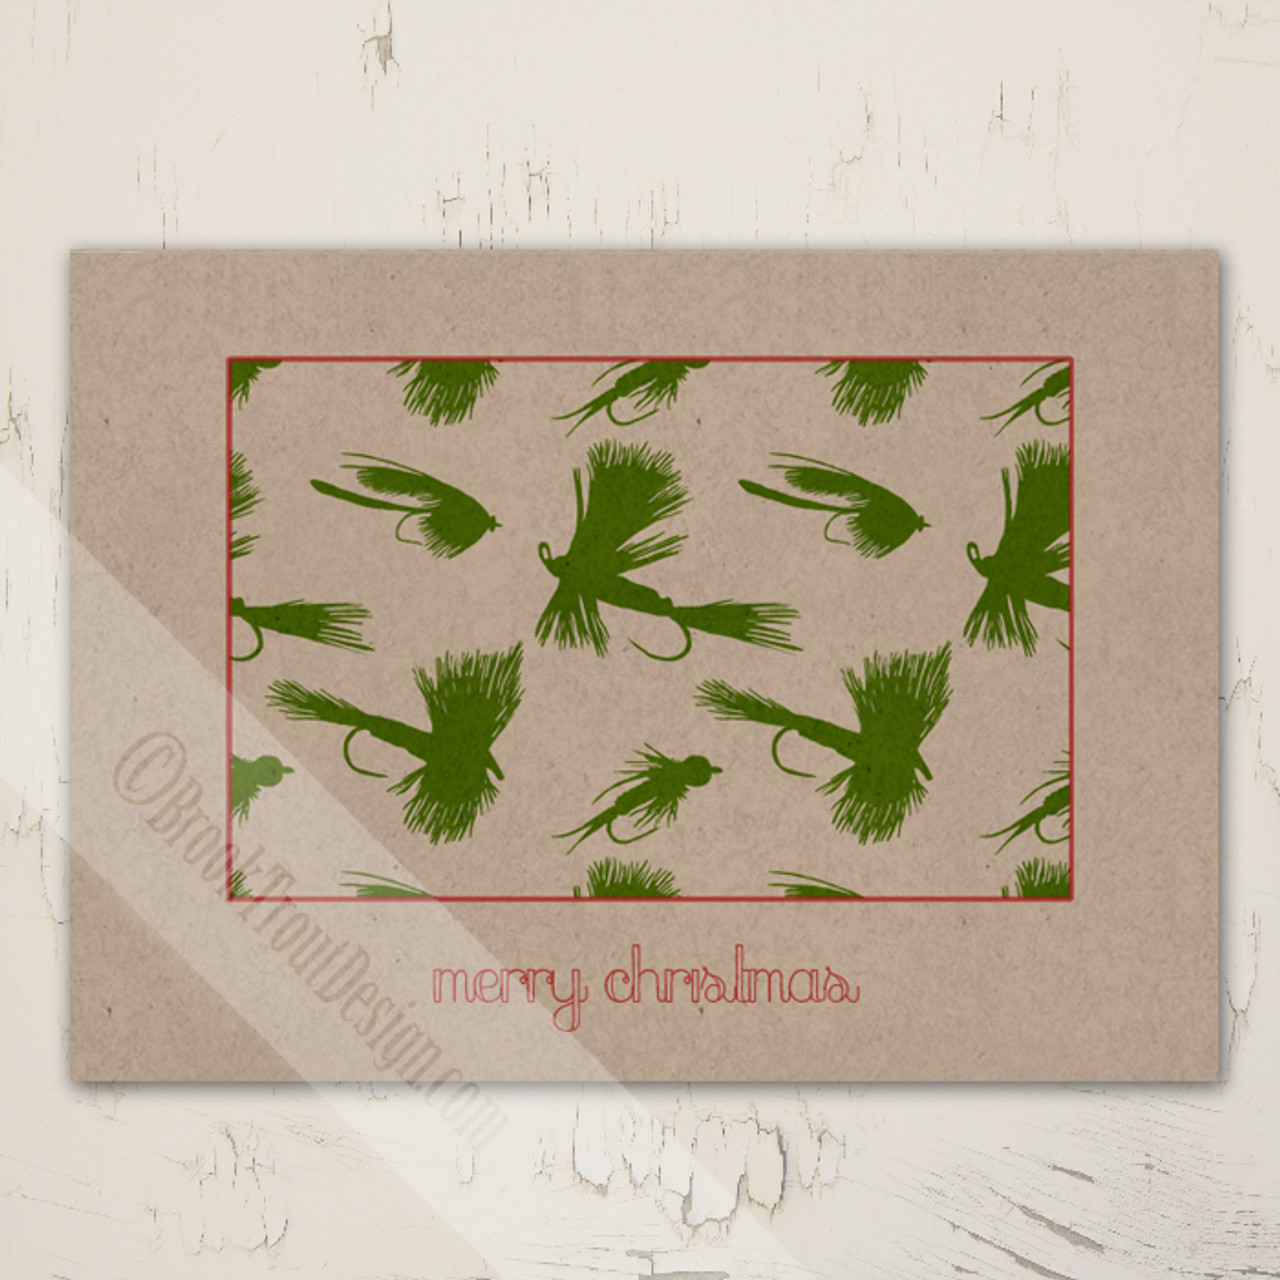 Rustic Fly Fishing Lures Christmas Cards (10 pk) - The Painting Pony